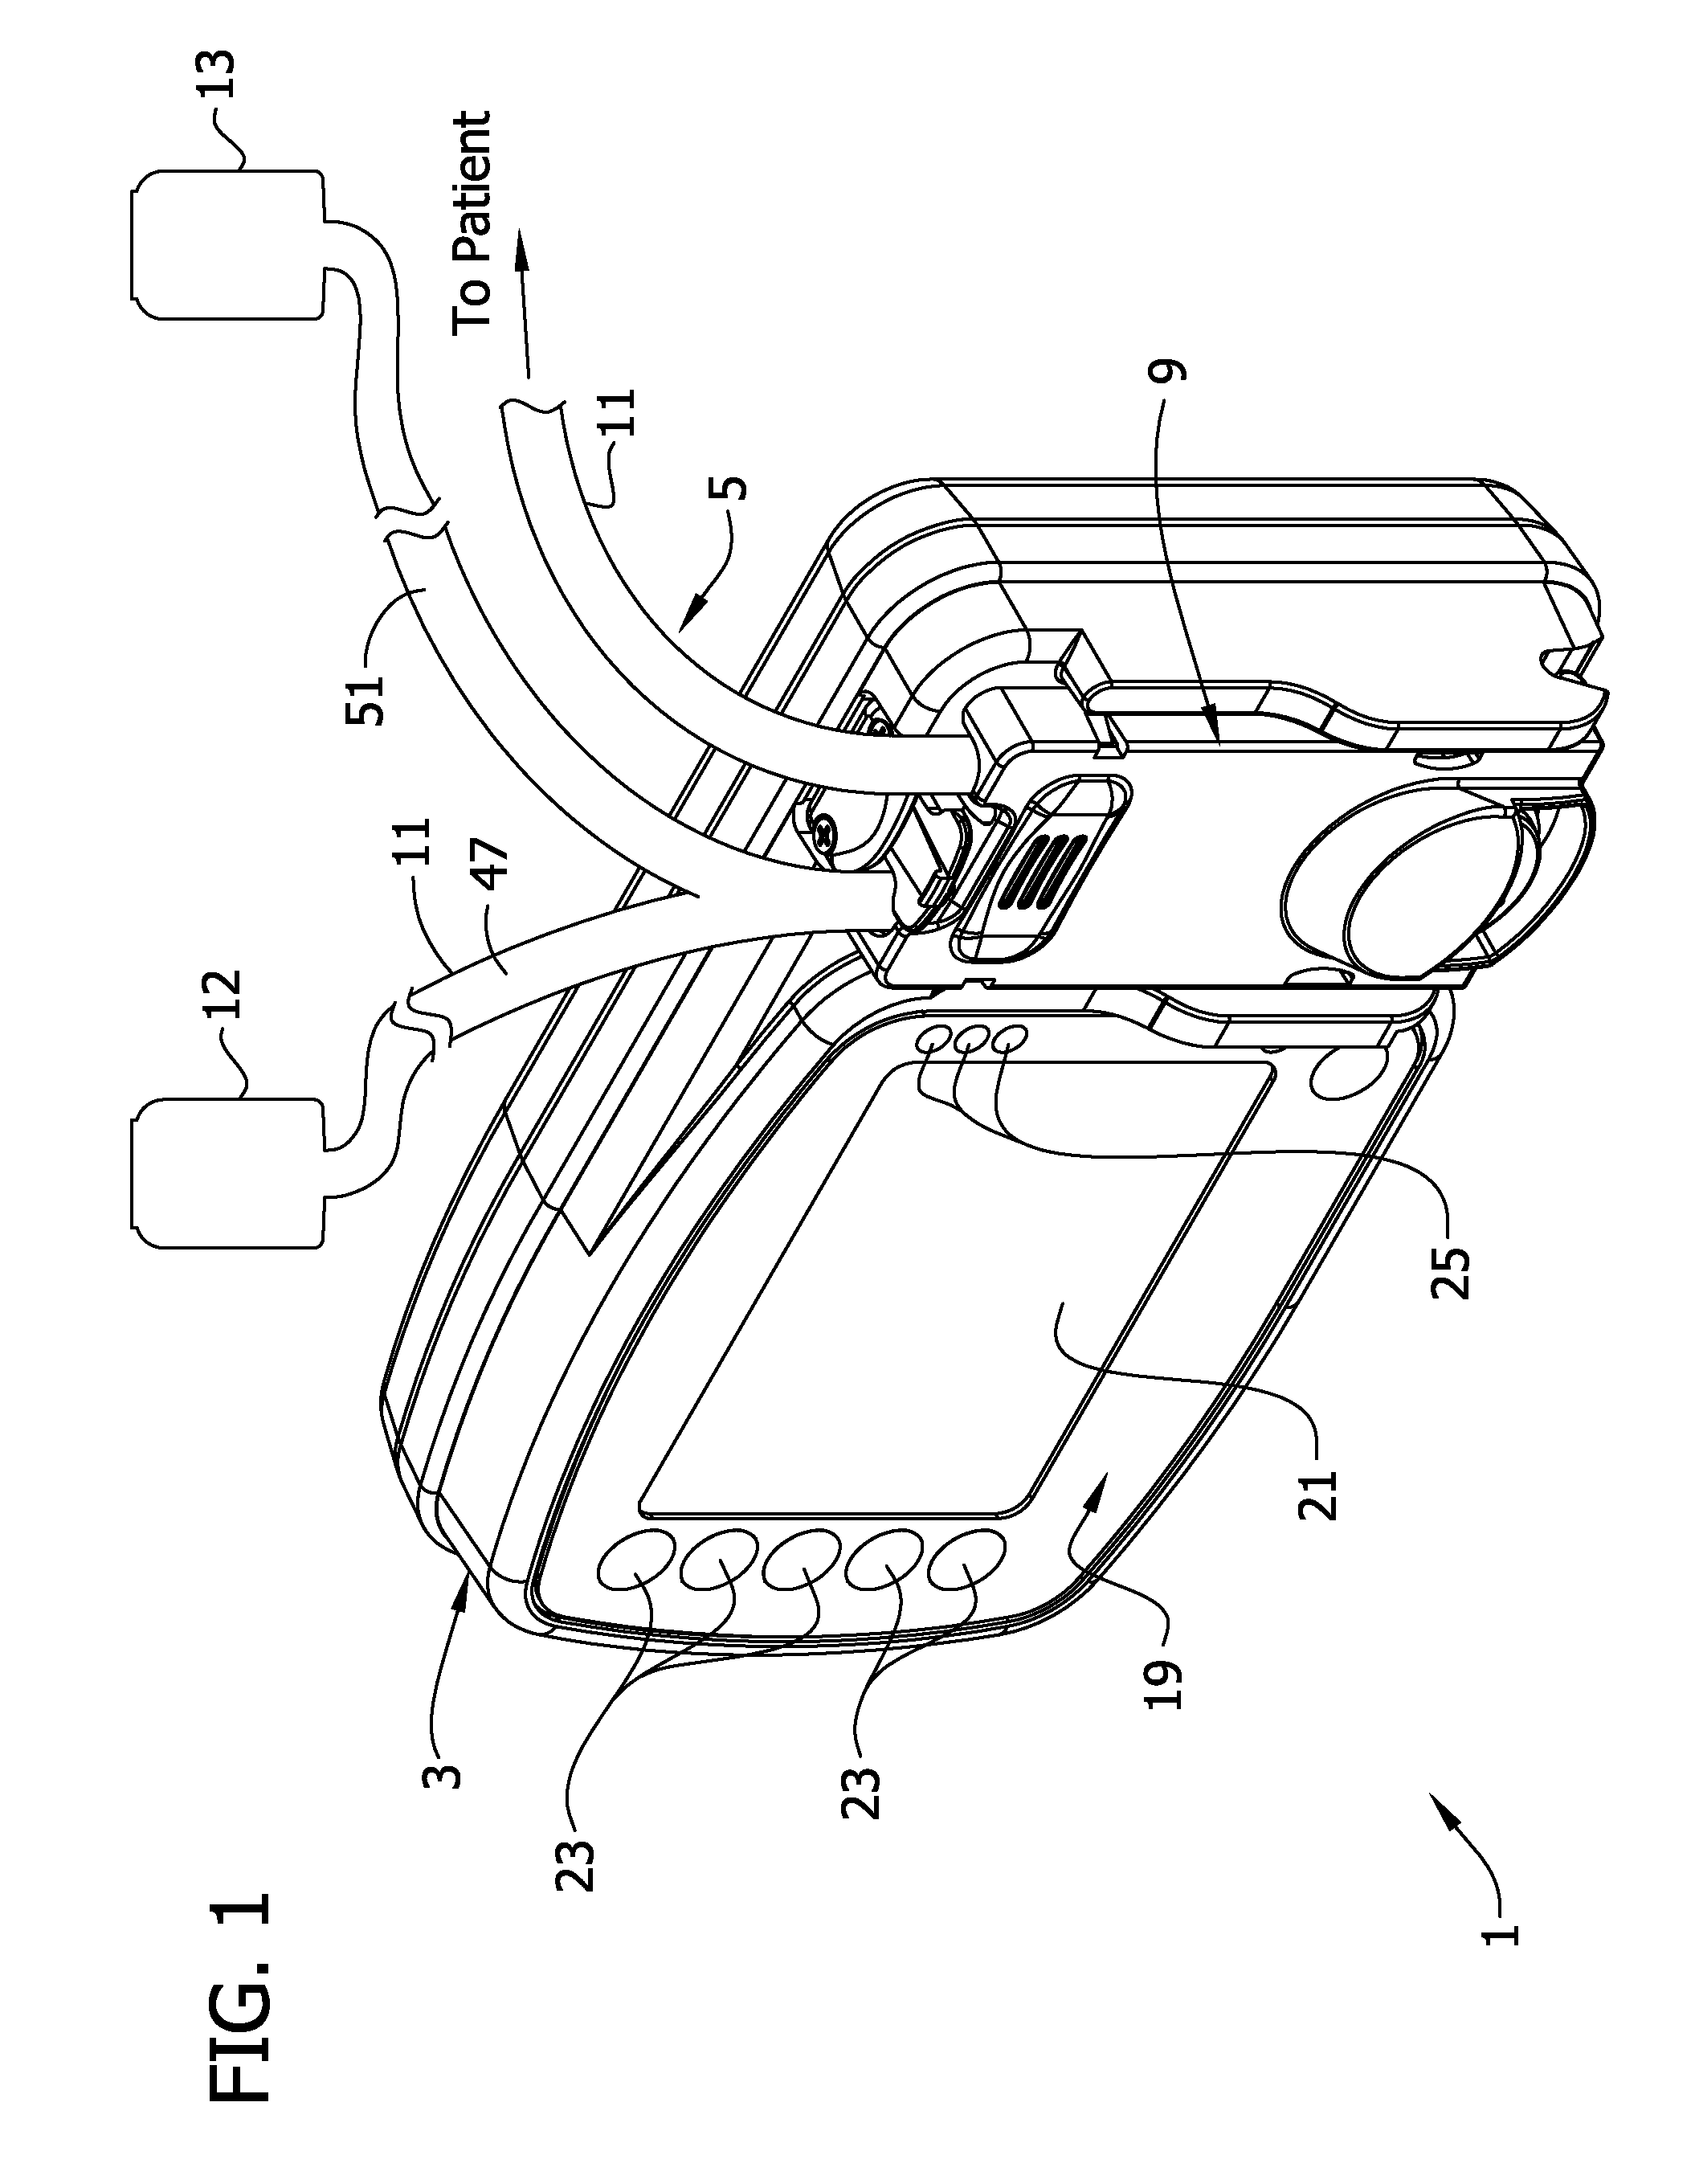 Feeding Rate Compensated Pump and Related Methods Therefor